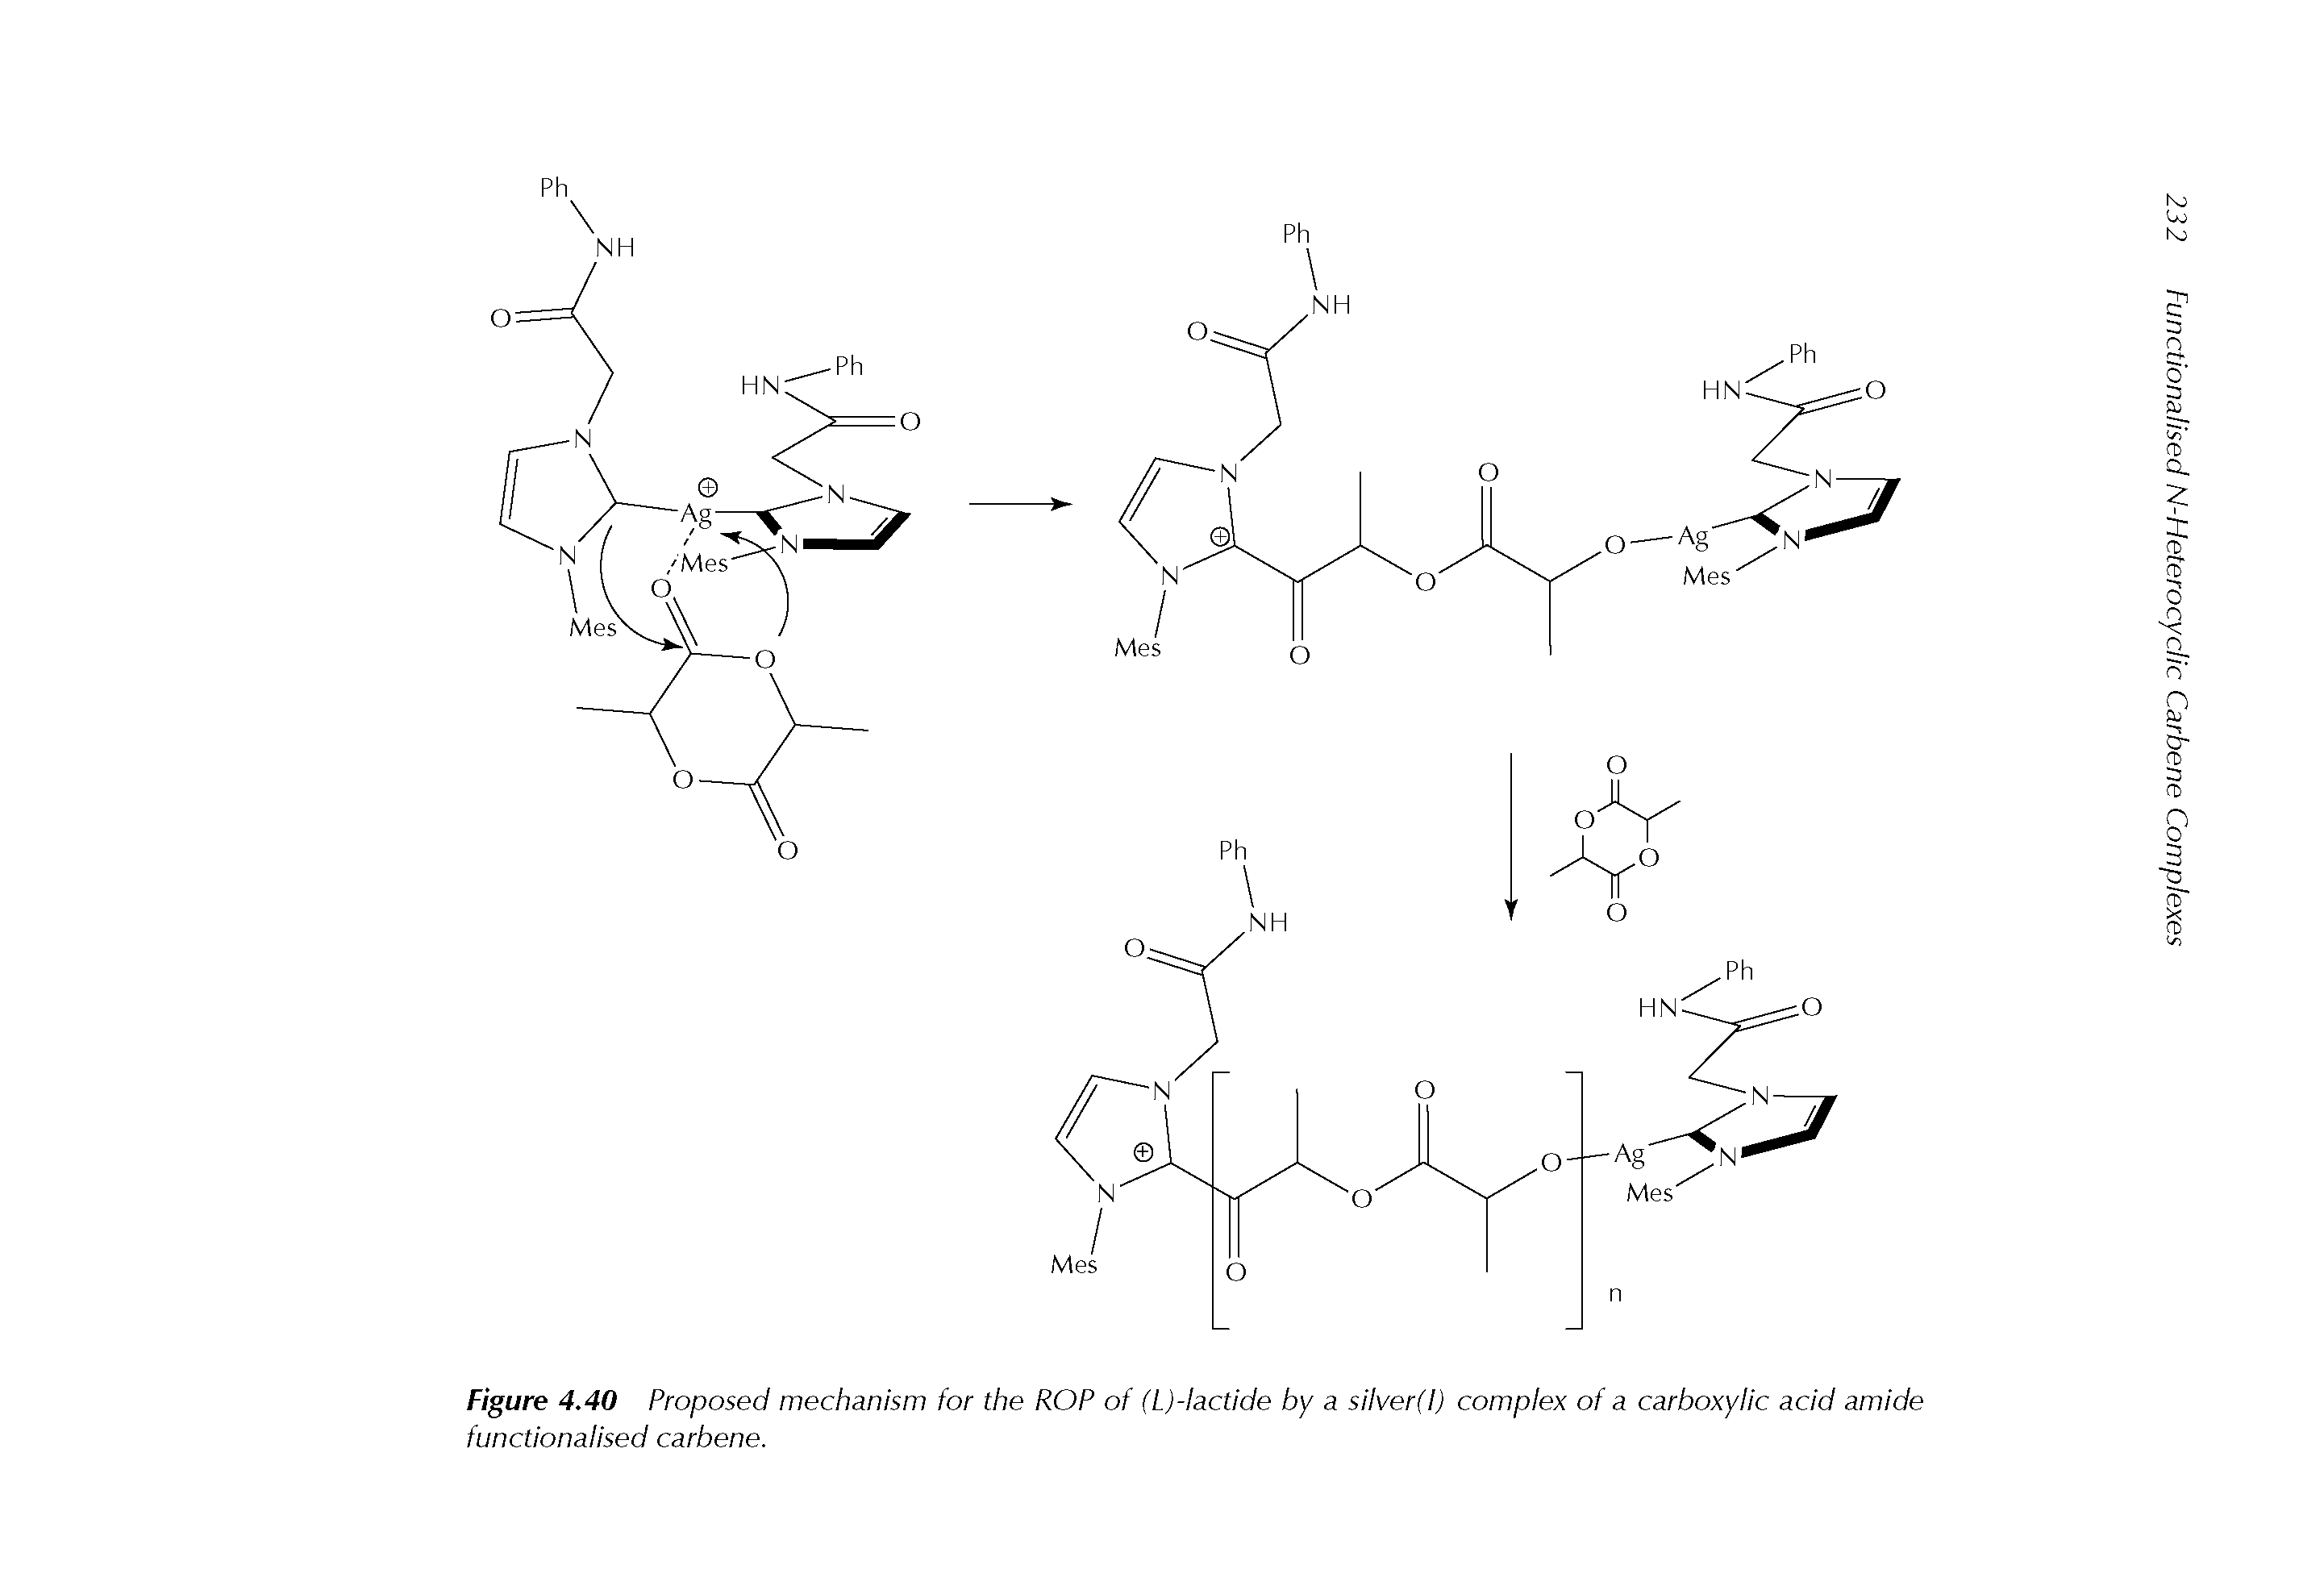 Figure 4.40 Proposed mechanism for the POP of (L)-lactide by a silver(l) complex of a carboxylic acid amide functionalised carbene.